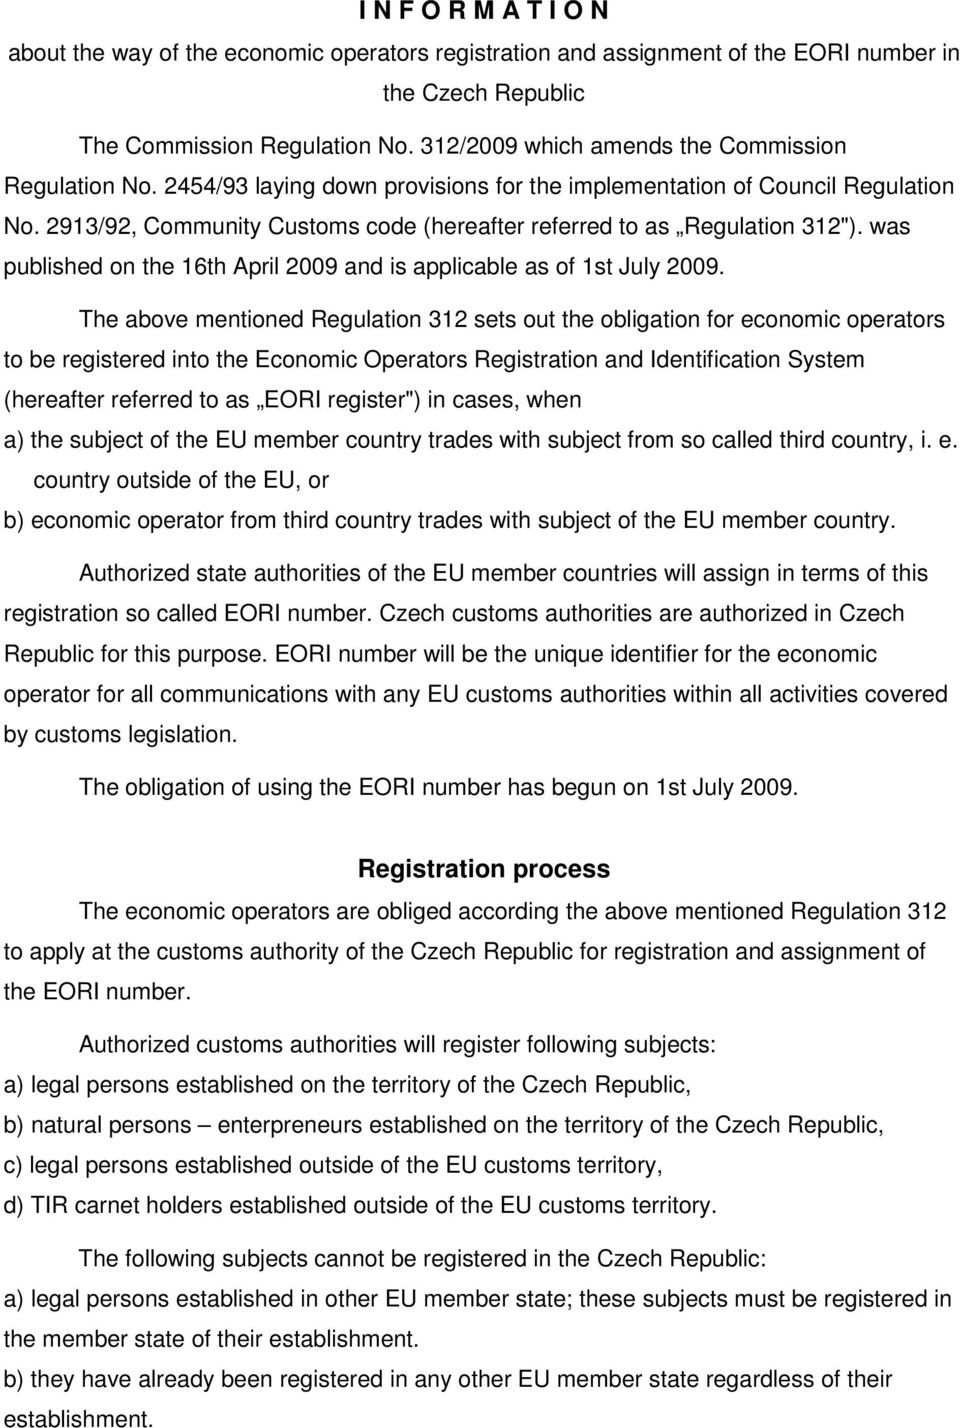 2913/92, Community Customs code (hereafter referred to as Regulation 312"). was published on the 16th April 2009 and is applicable as of 1st July 2009.